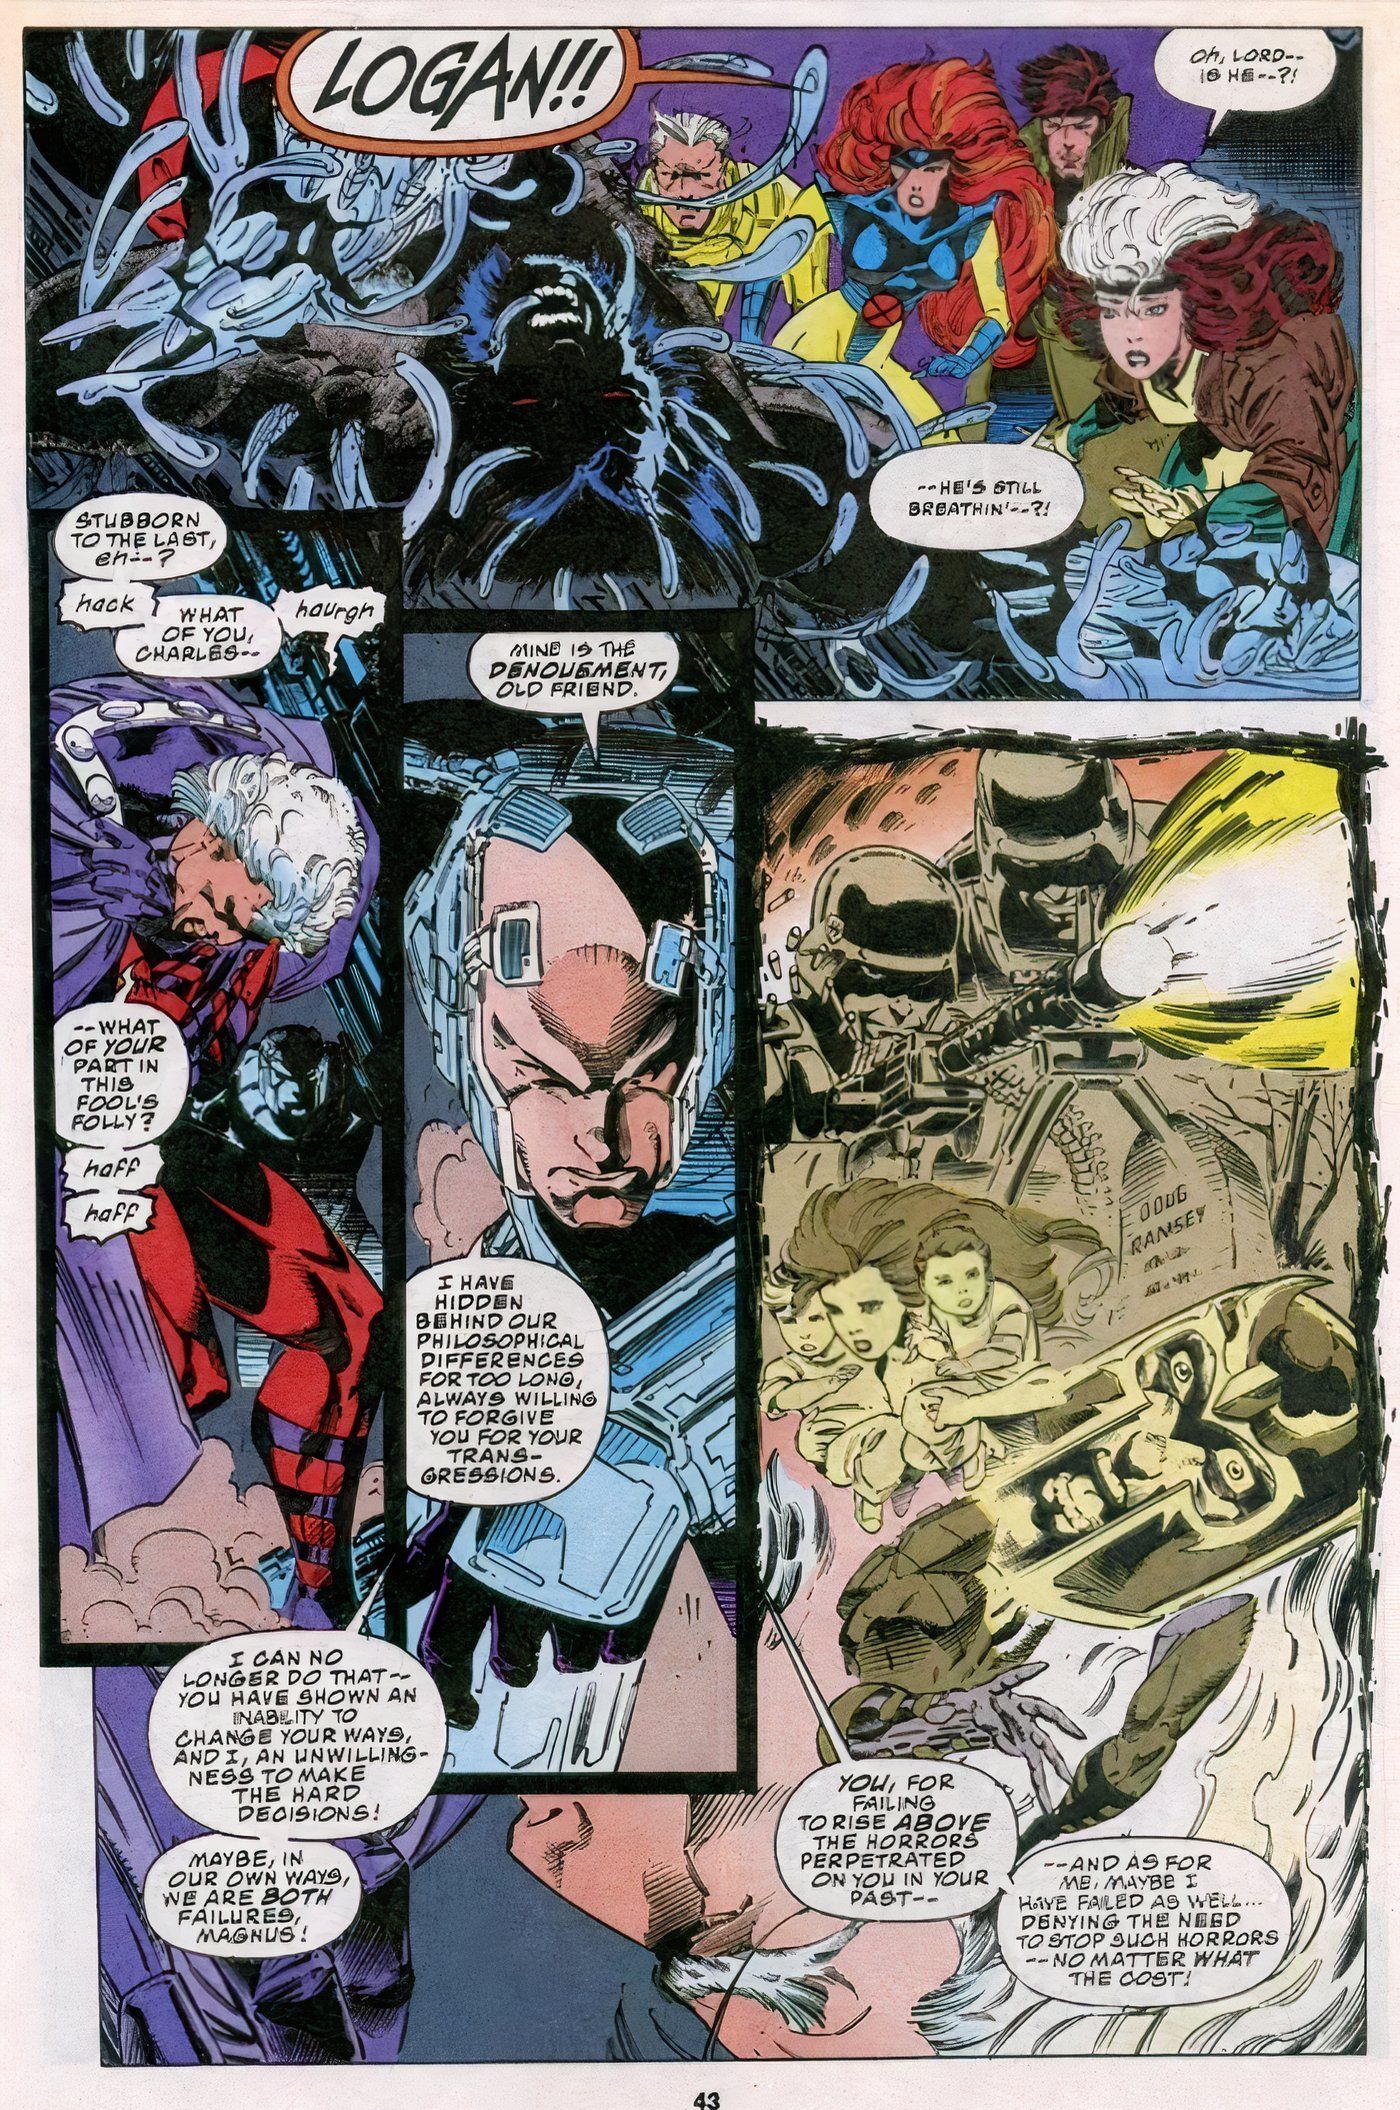 Fatal Attractions X-Men #25 featuring Wolverine and Magneto and Rogue and Jean Grey and Gambit and Professor X